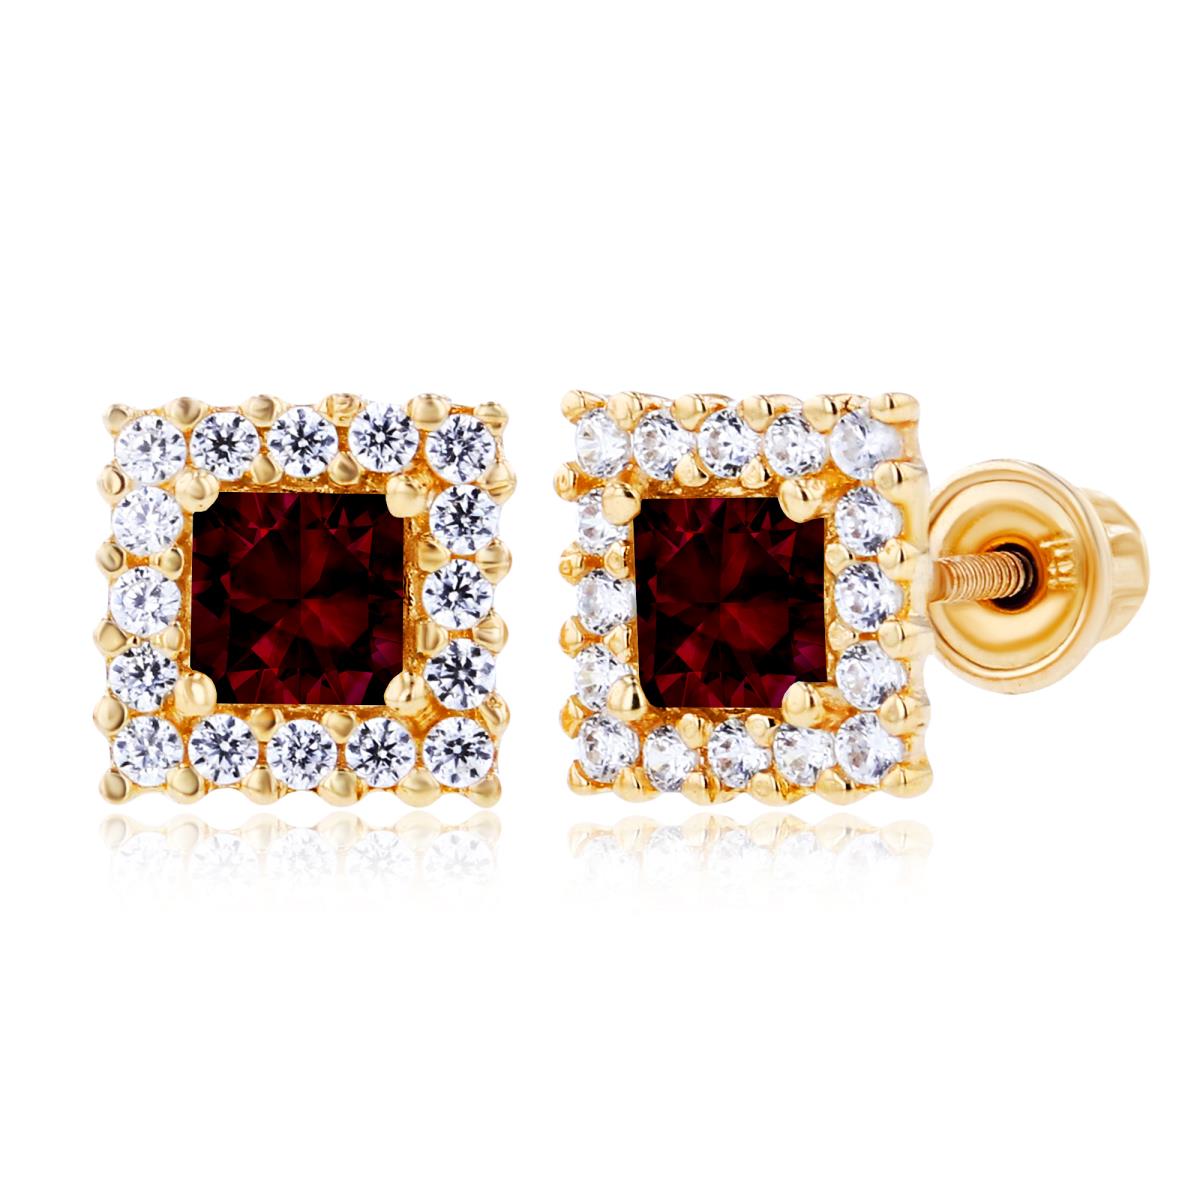 Sterling Silver Yellow 3mm Square Garnet & 1mm Created White Sapphire Square Screwback Earrings